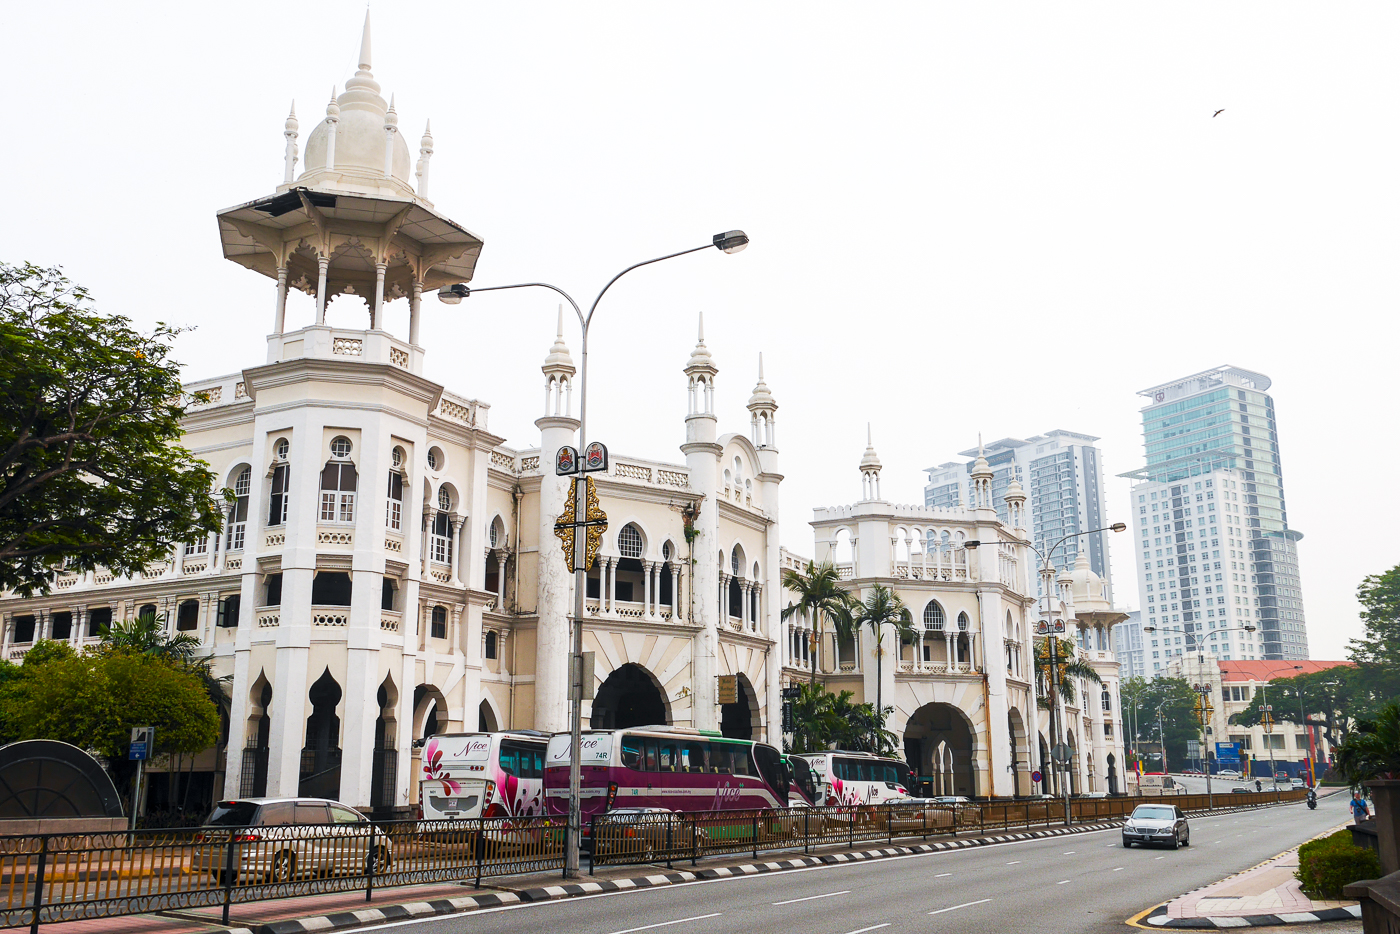 KL Railway station with Eastern and Western architectural influences | Photo credit: Wasin Waeosri